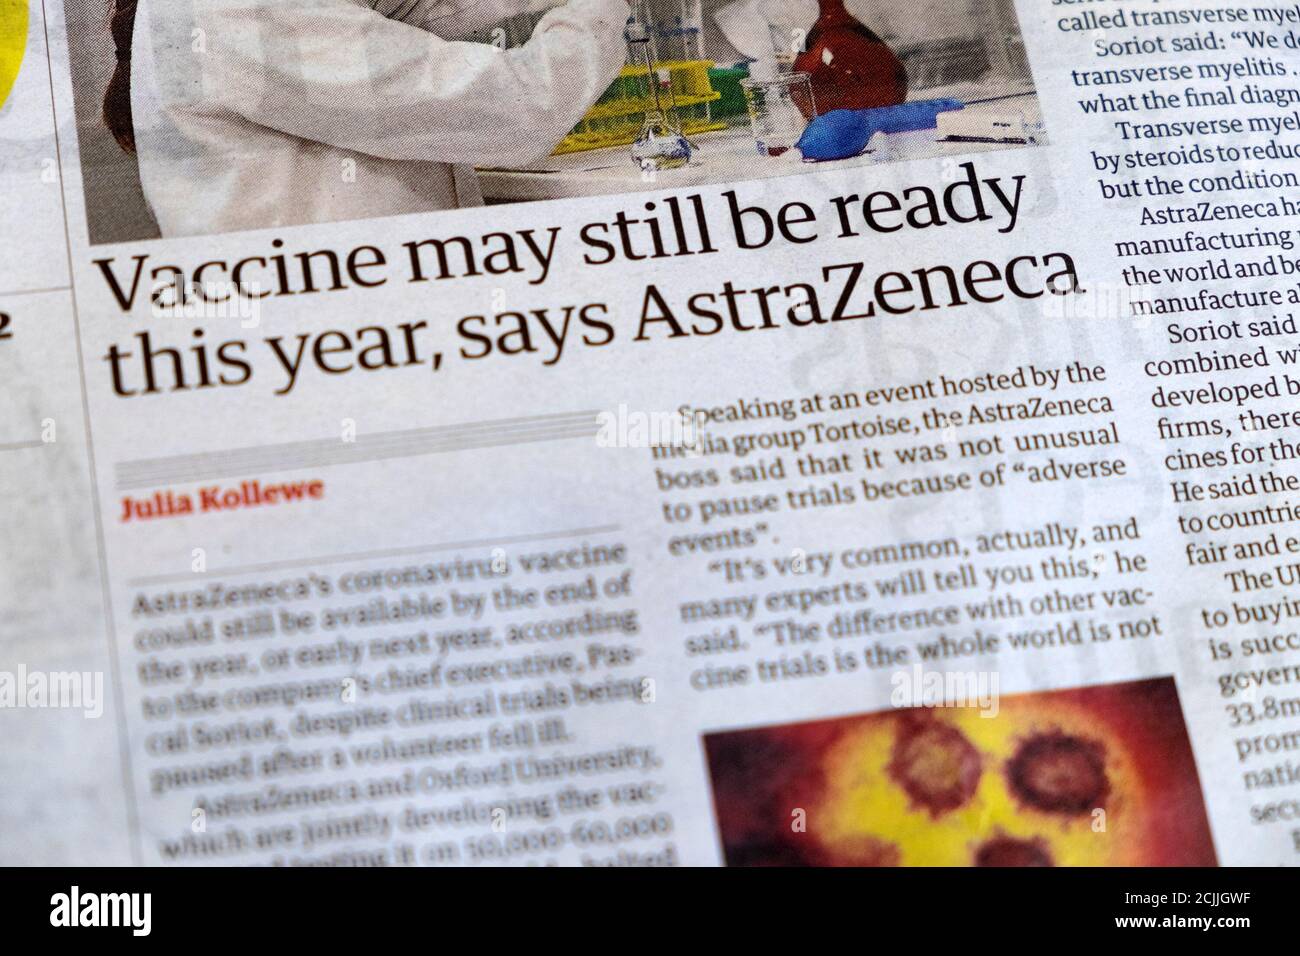 'Vaccine may still be ready this year, says AstraZeneca' at Oxford University Guardian newspaper headline article on 10 September 2020 London England Stock Photo